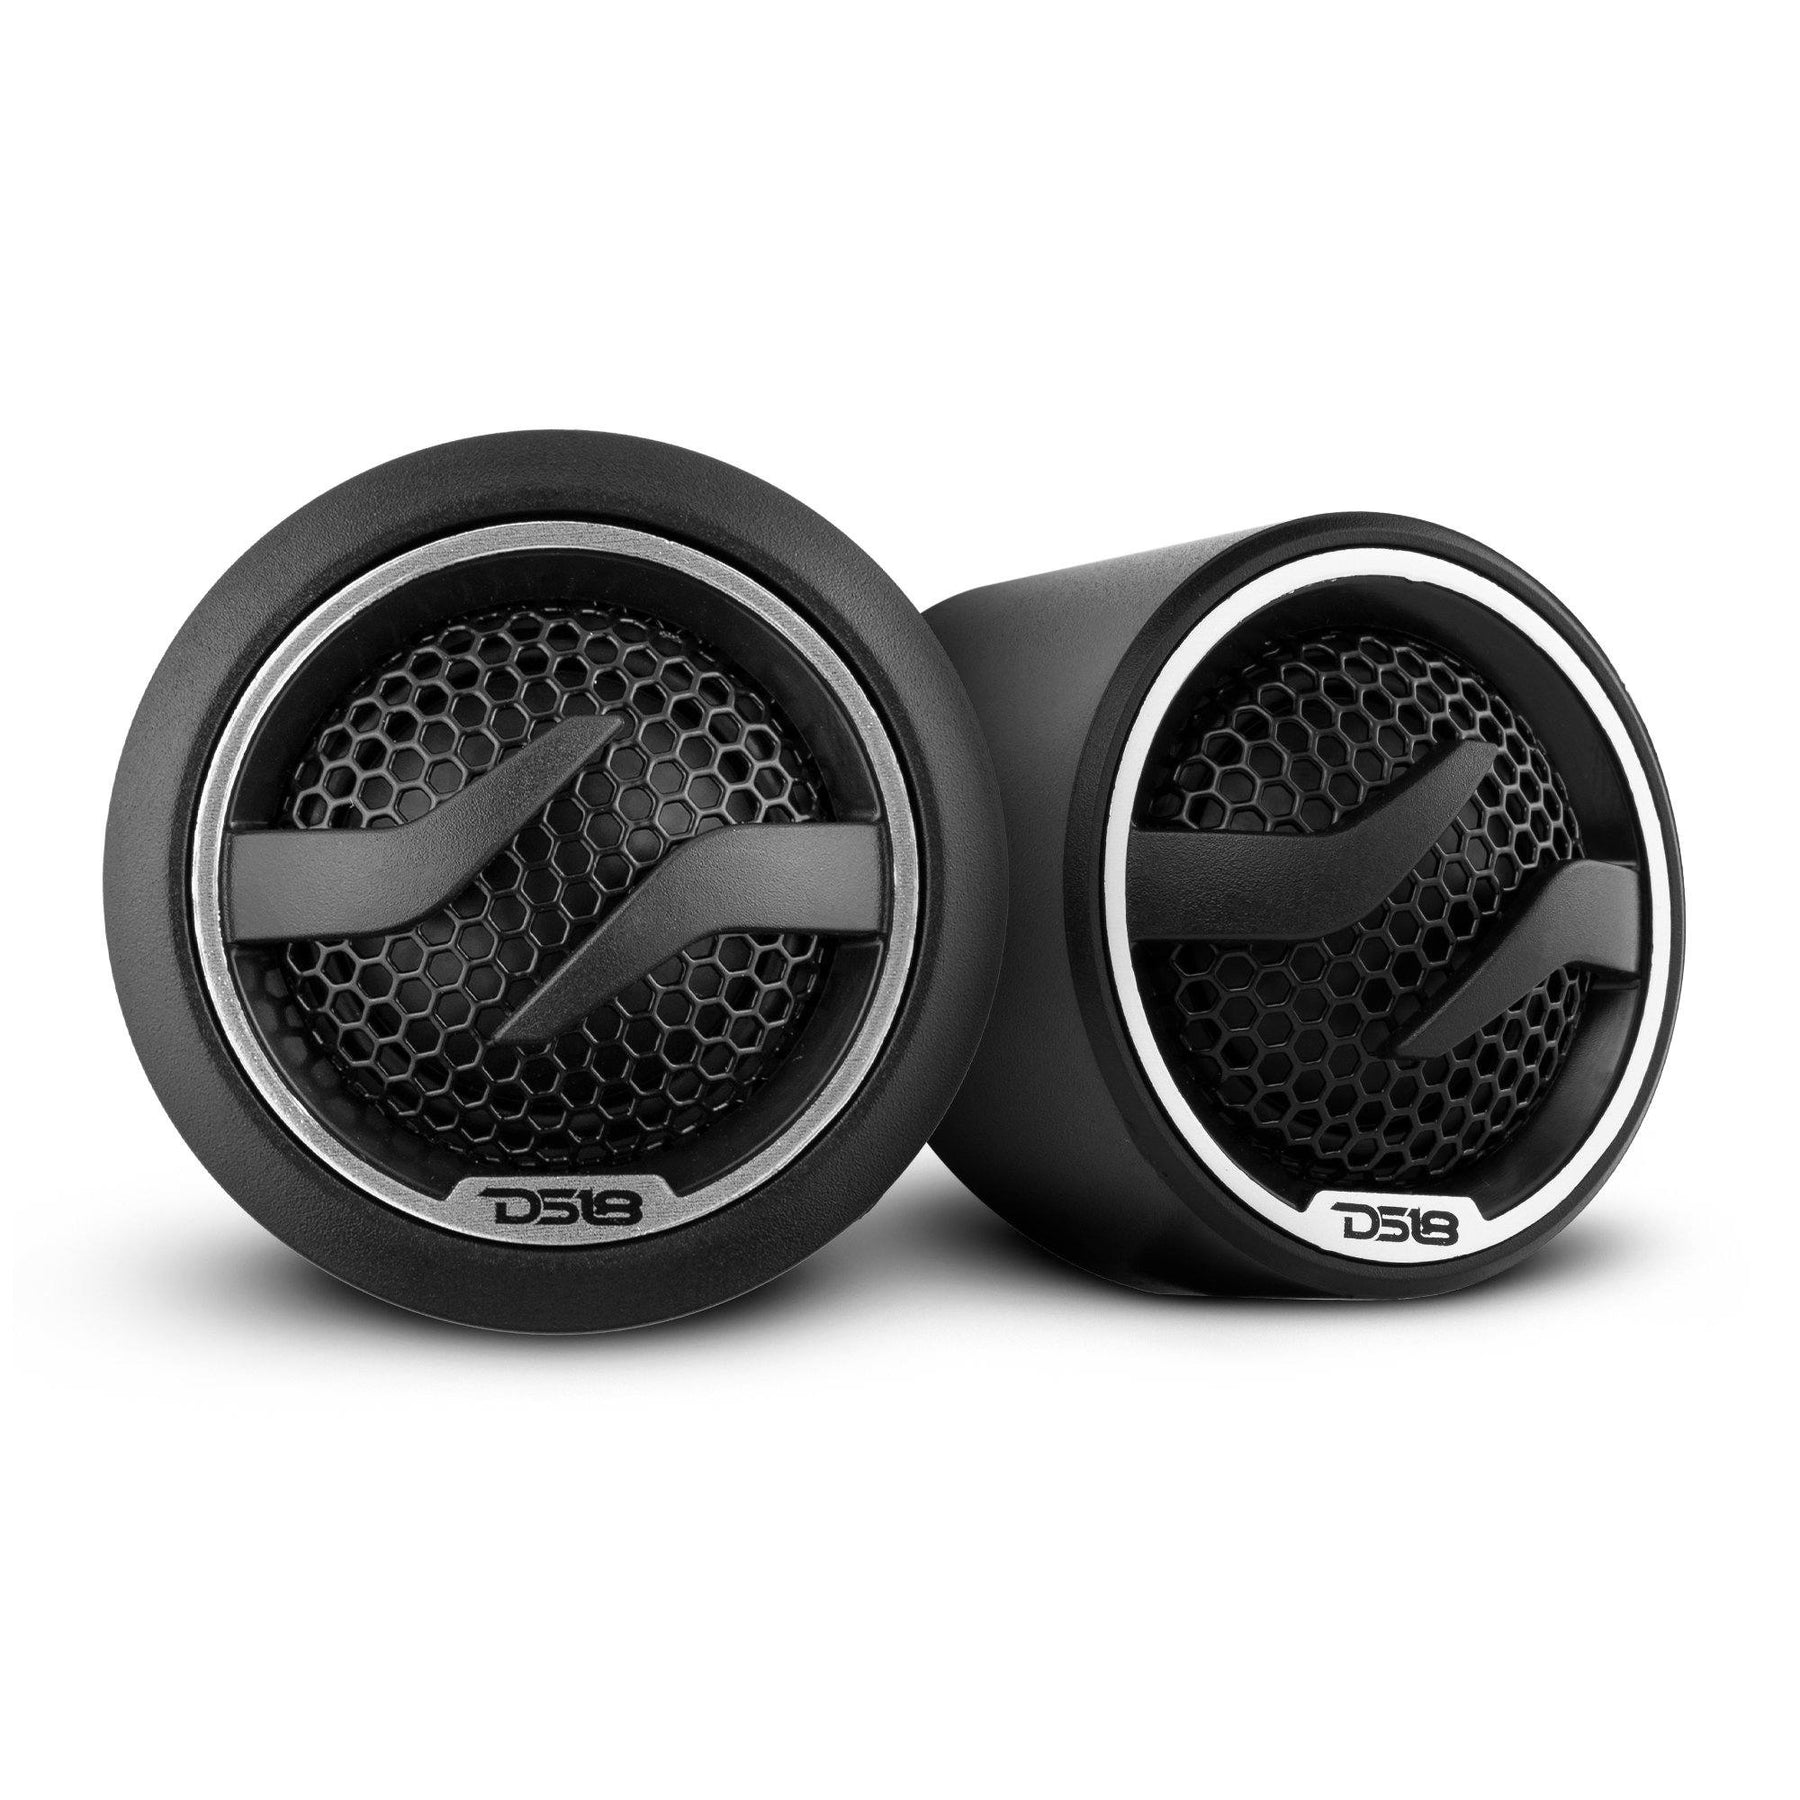 DS18 JK Speaker Replacement Package